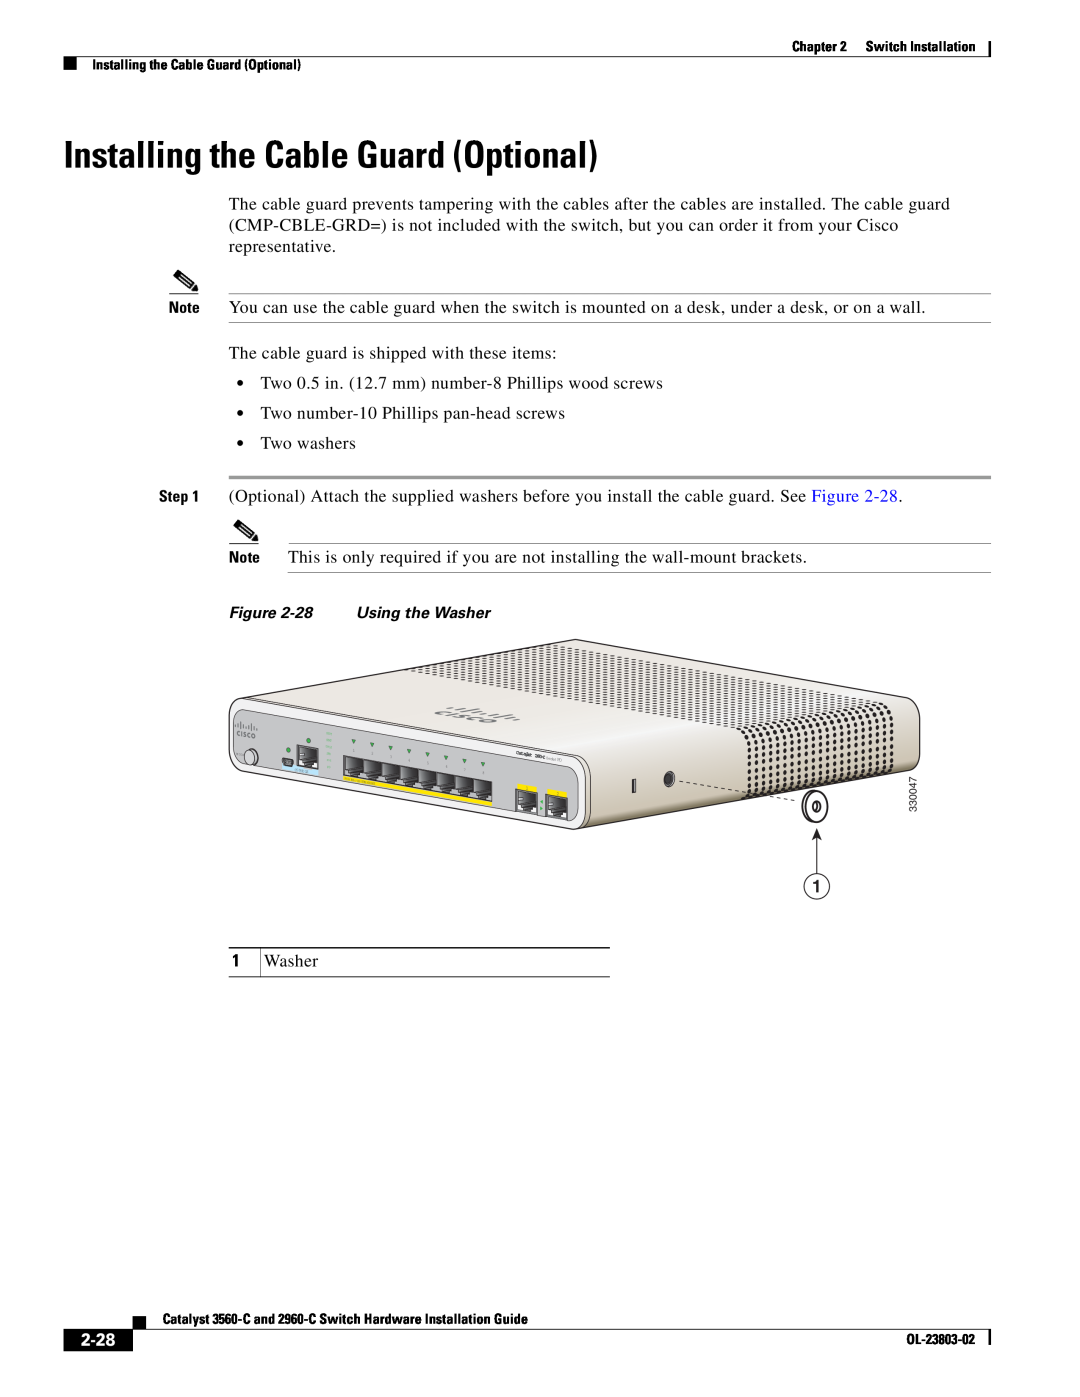 Cisco Systems 3560-C manual Installing the Cable Guard Optional, 2-28 